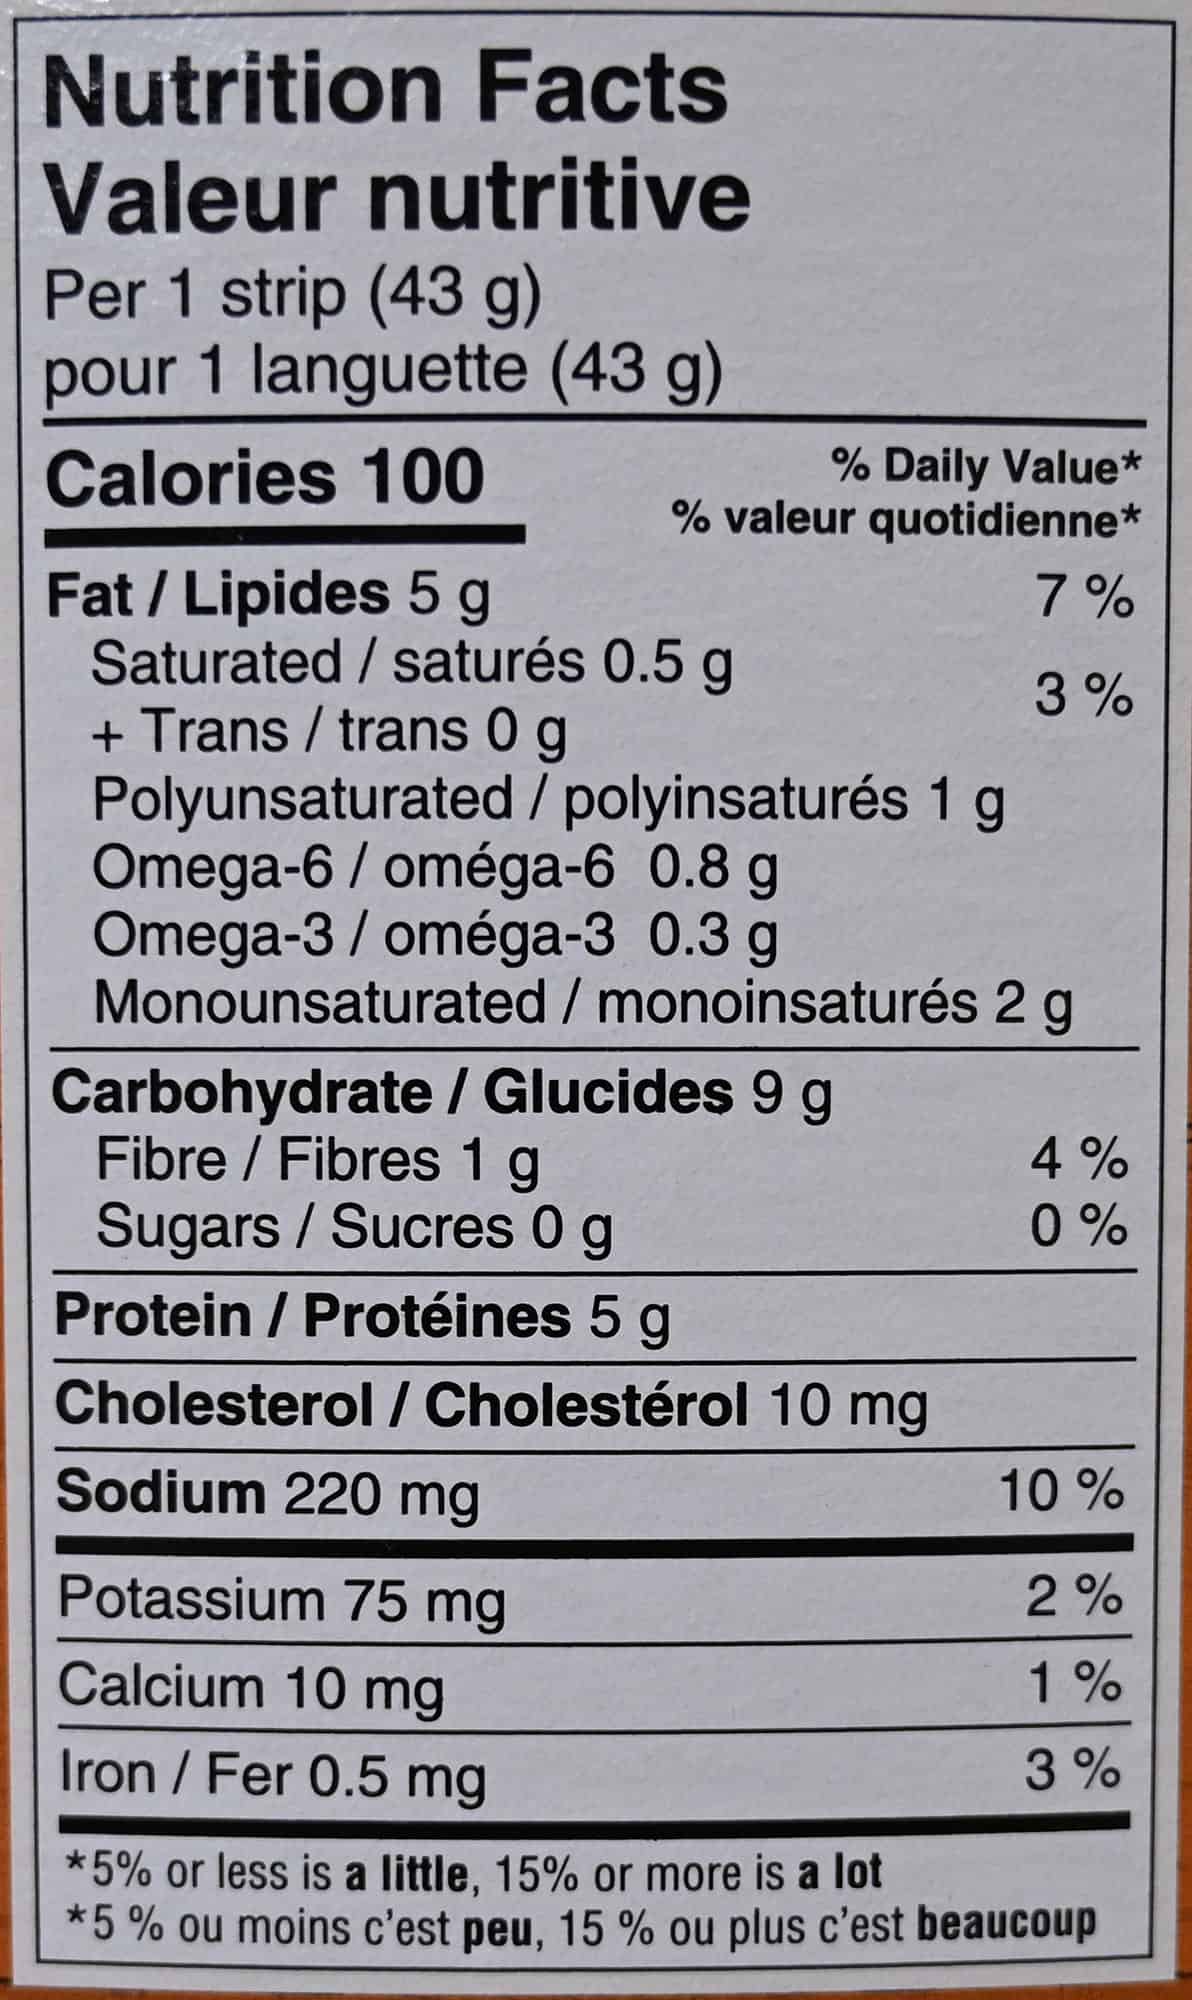 Image of the nutrition facts for the chicken strips from the box.